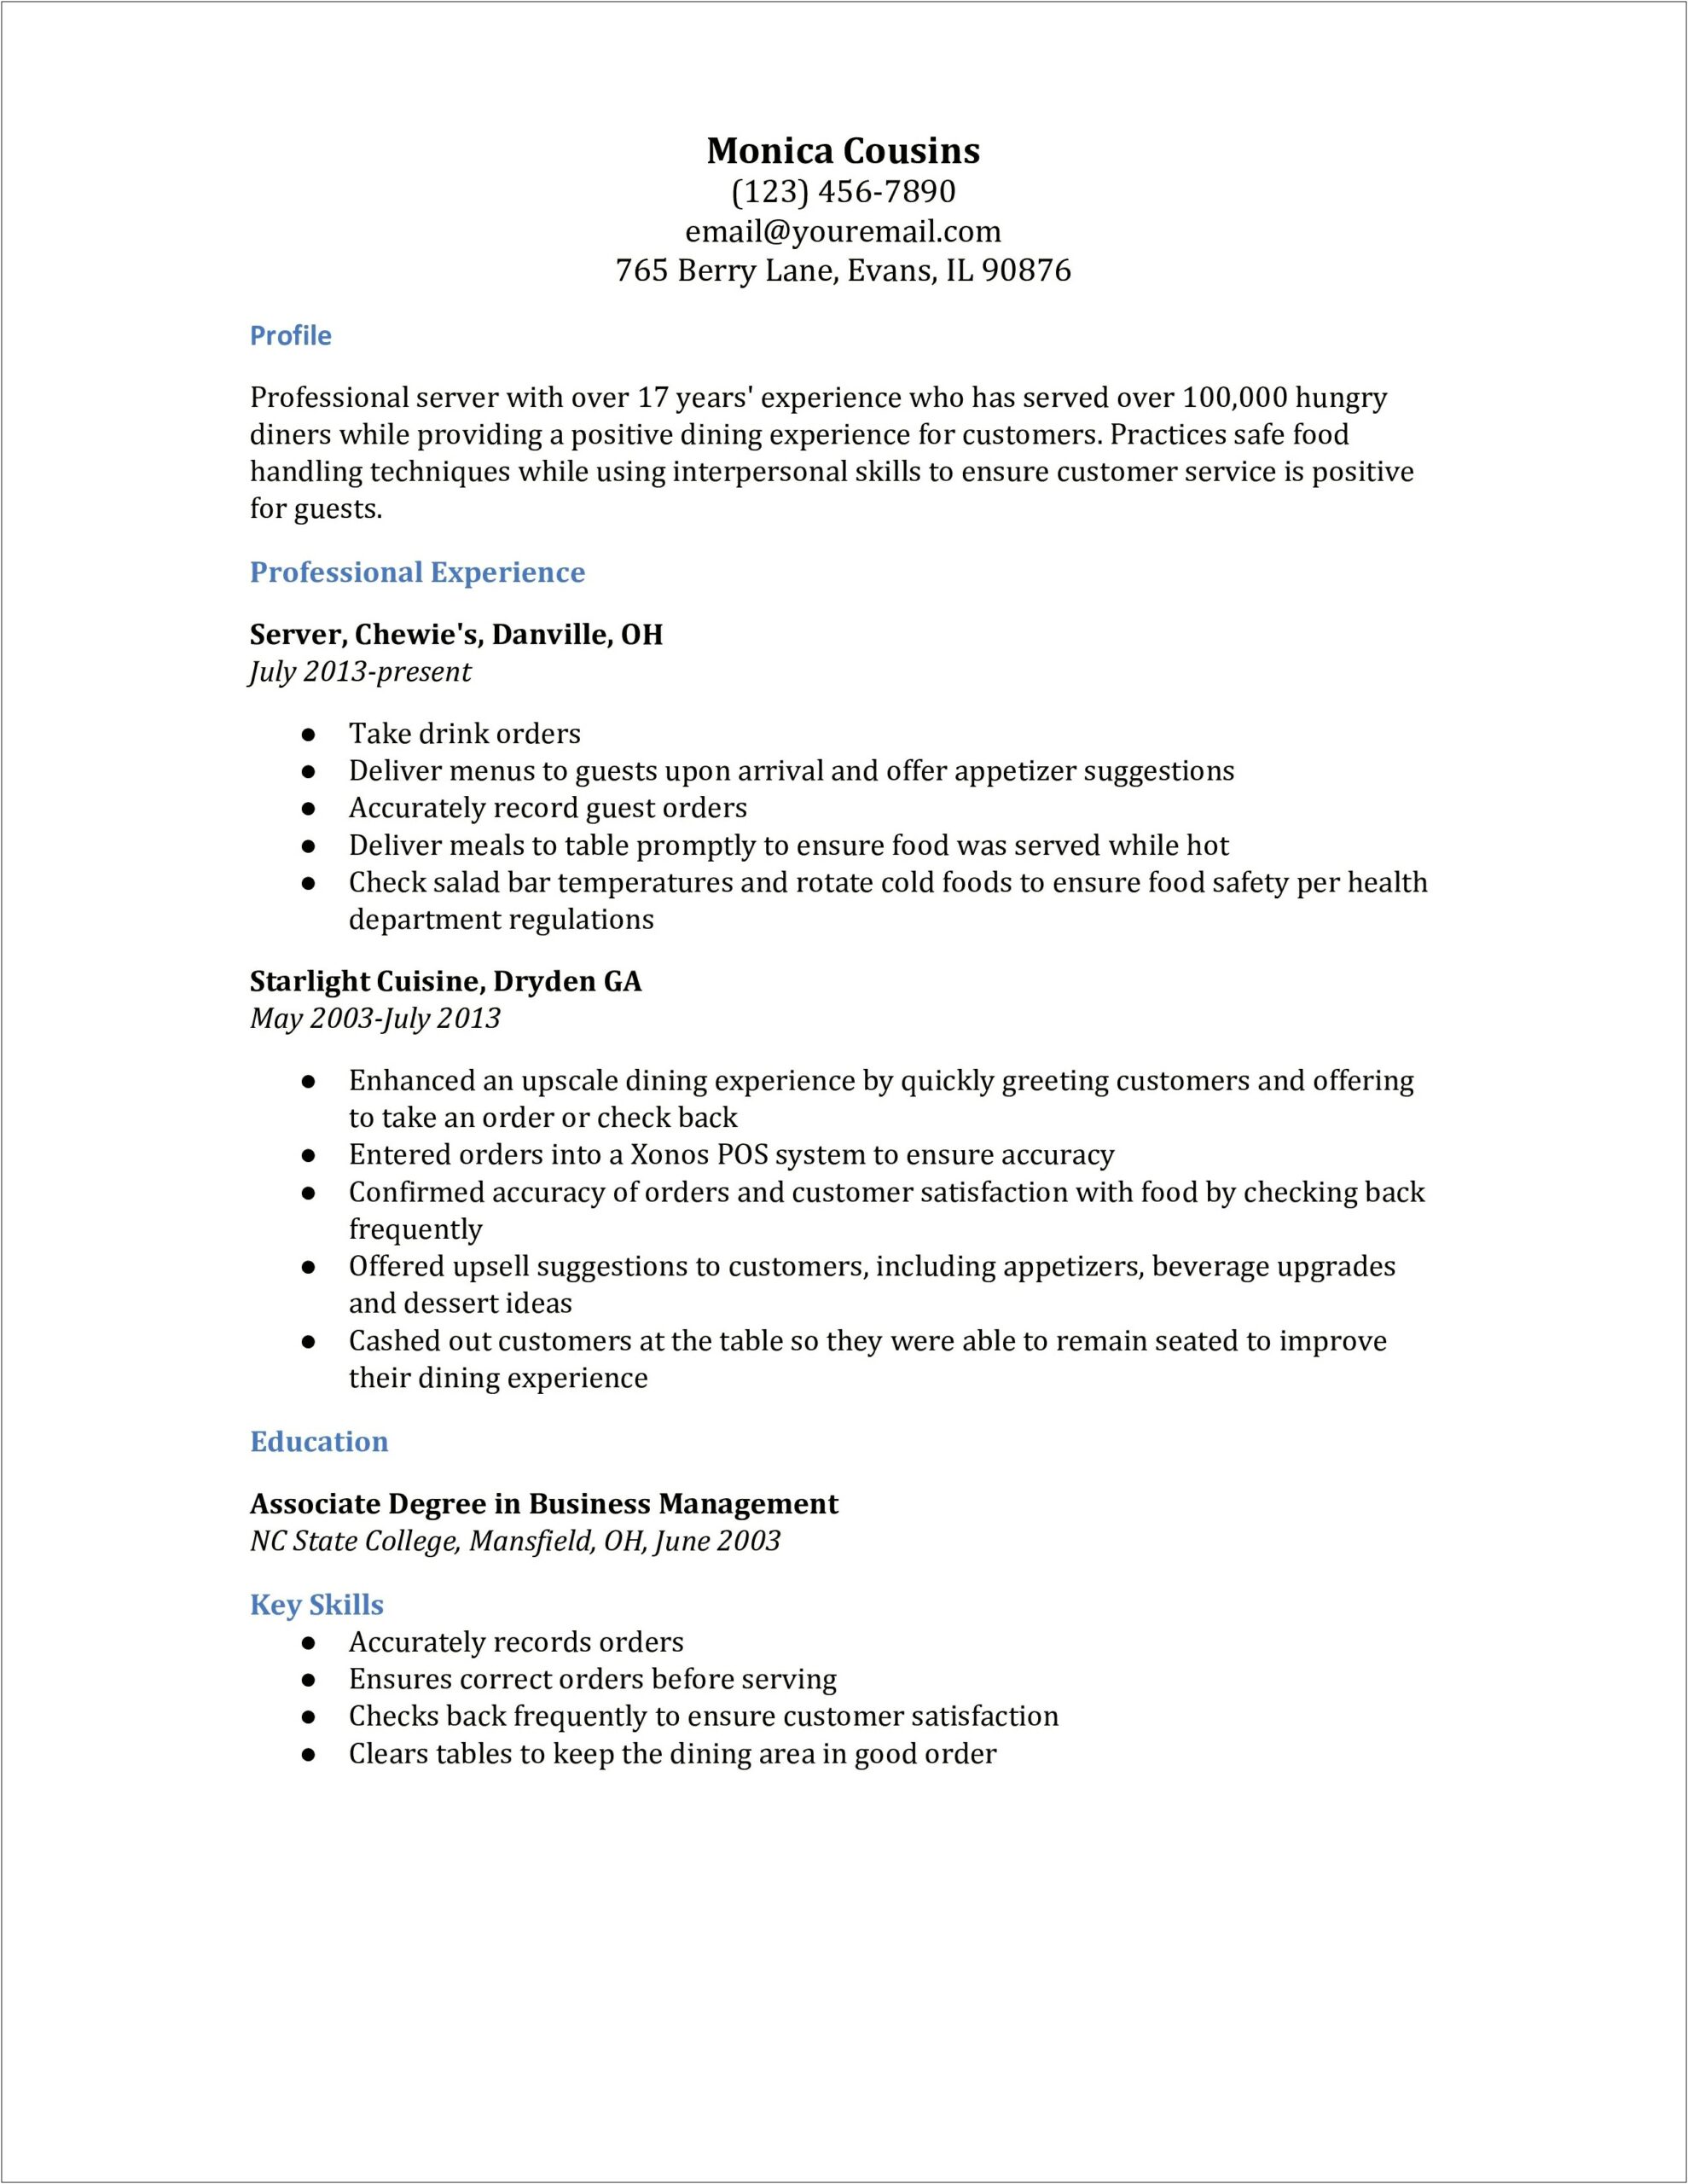 Example Soft Skills For It Resume